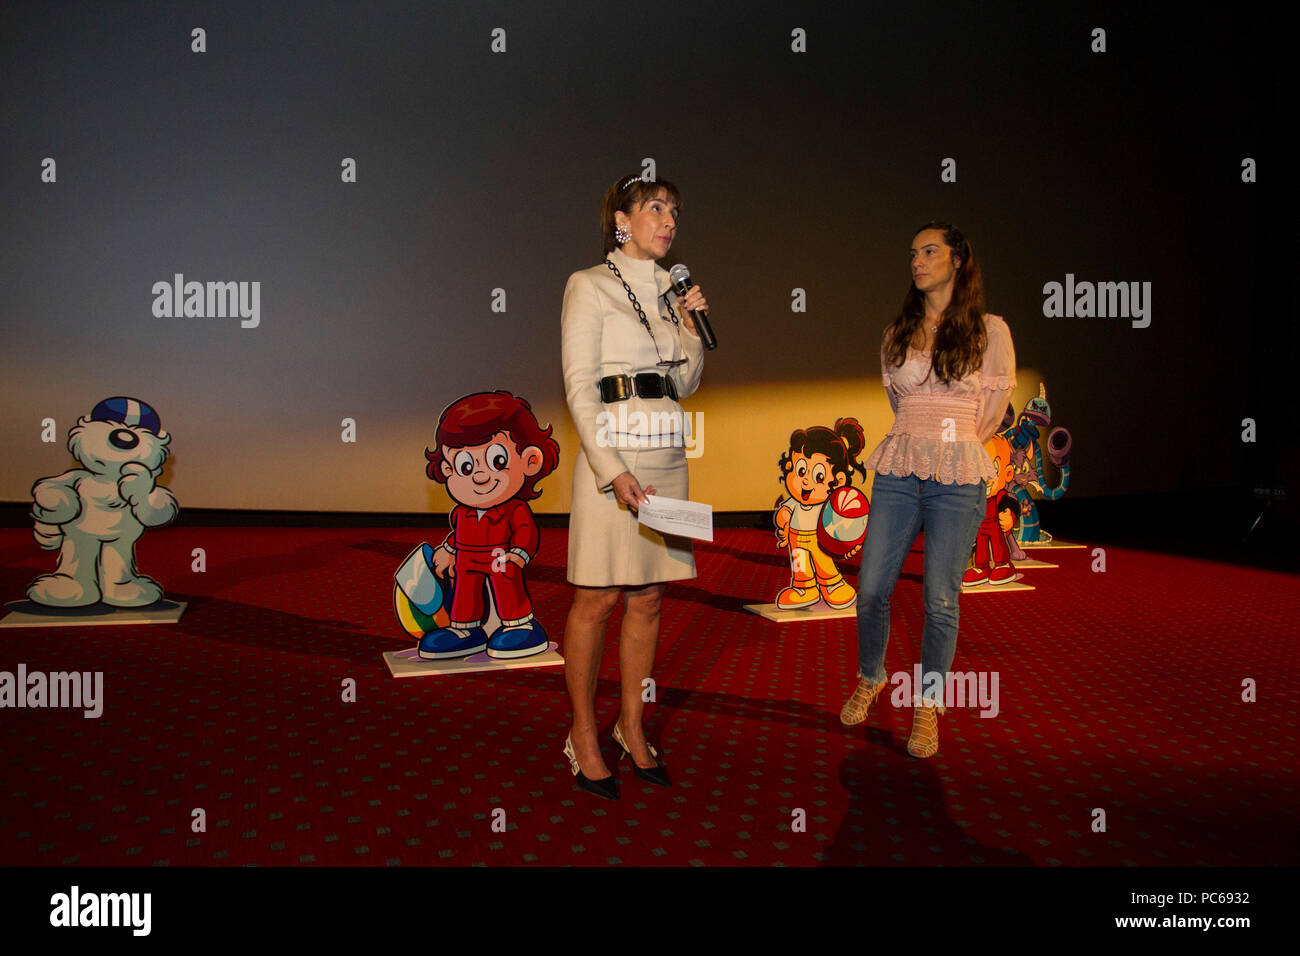 SÃO PAULO, SP - 31.07.2018: ANIMAÇÃO DO SENNINHA É LANÇADA EM SP - This event was held on Tuesday (31) the launch event of the new animated series of the character Senninha that will premiere on 08/08 on Gloobat&#39;s Glat cat channel. The animation that is inspired by three-time For 1 champion Ayrton Senna is called &quotquot;Senninha na Pista Maluca&quot; (&amotquot;Senninha na Pista Maluca&quot;), h has 26 episodes, each withwith 11 minutes, which will be shown daily arious times. Not to mention Viviane Senna, ta, the president of the Ayrton Senna Institute alongside Bianca Senna, director Stock Photo